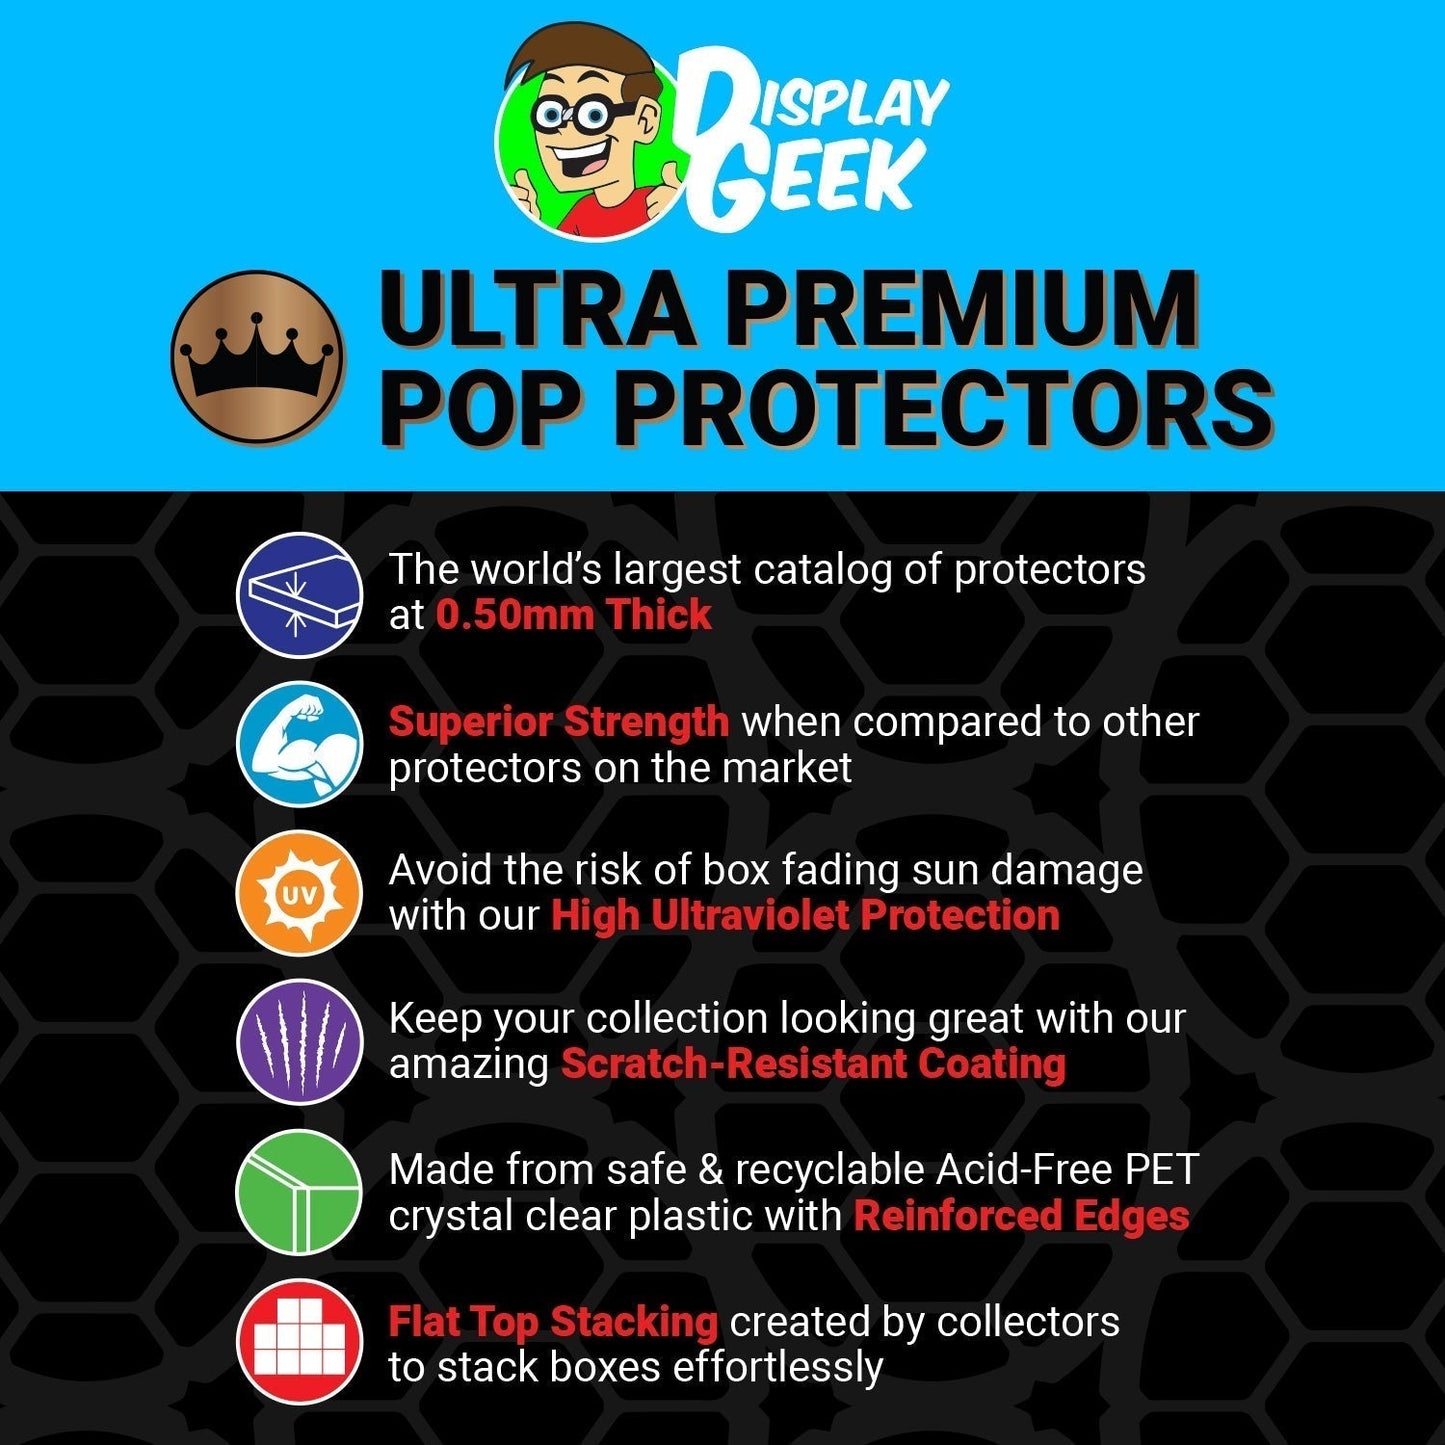 Pop Protector for 4 Pack Luffytaro, Sabo, Roronoa & Jinbe Glow Funko Pop - PPG Pop Protector Guide Search Created by Display Geek